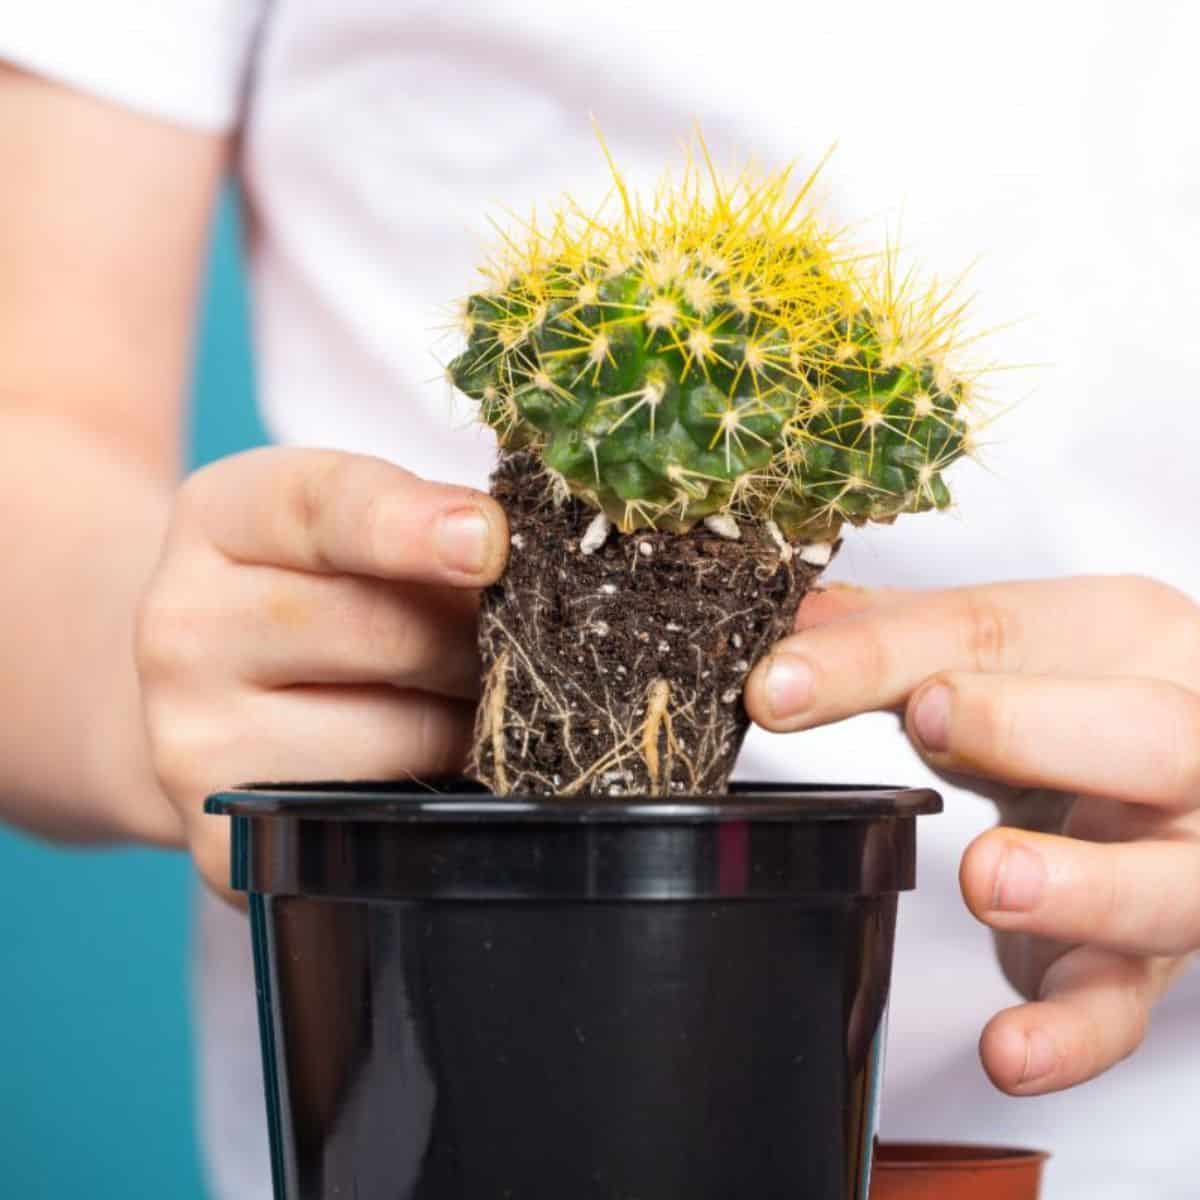 Hands carefully holding a cactus in a pot.